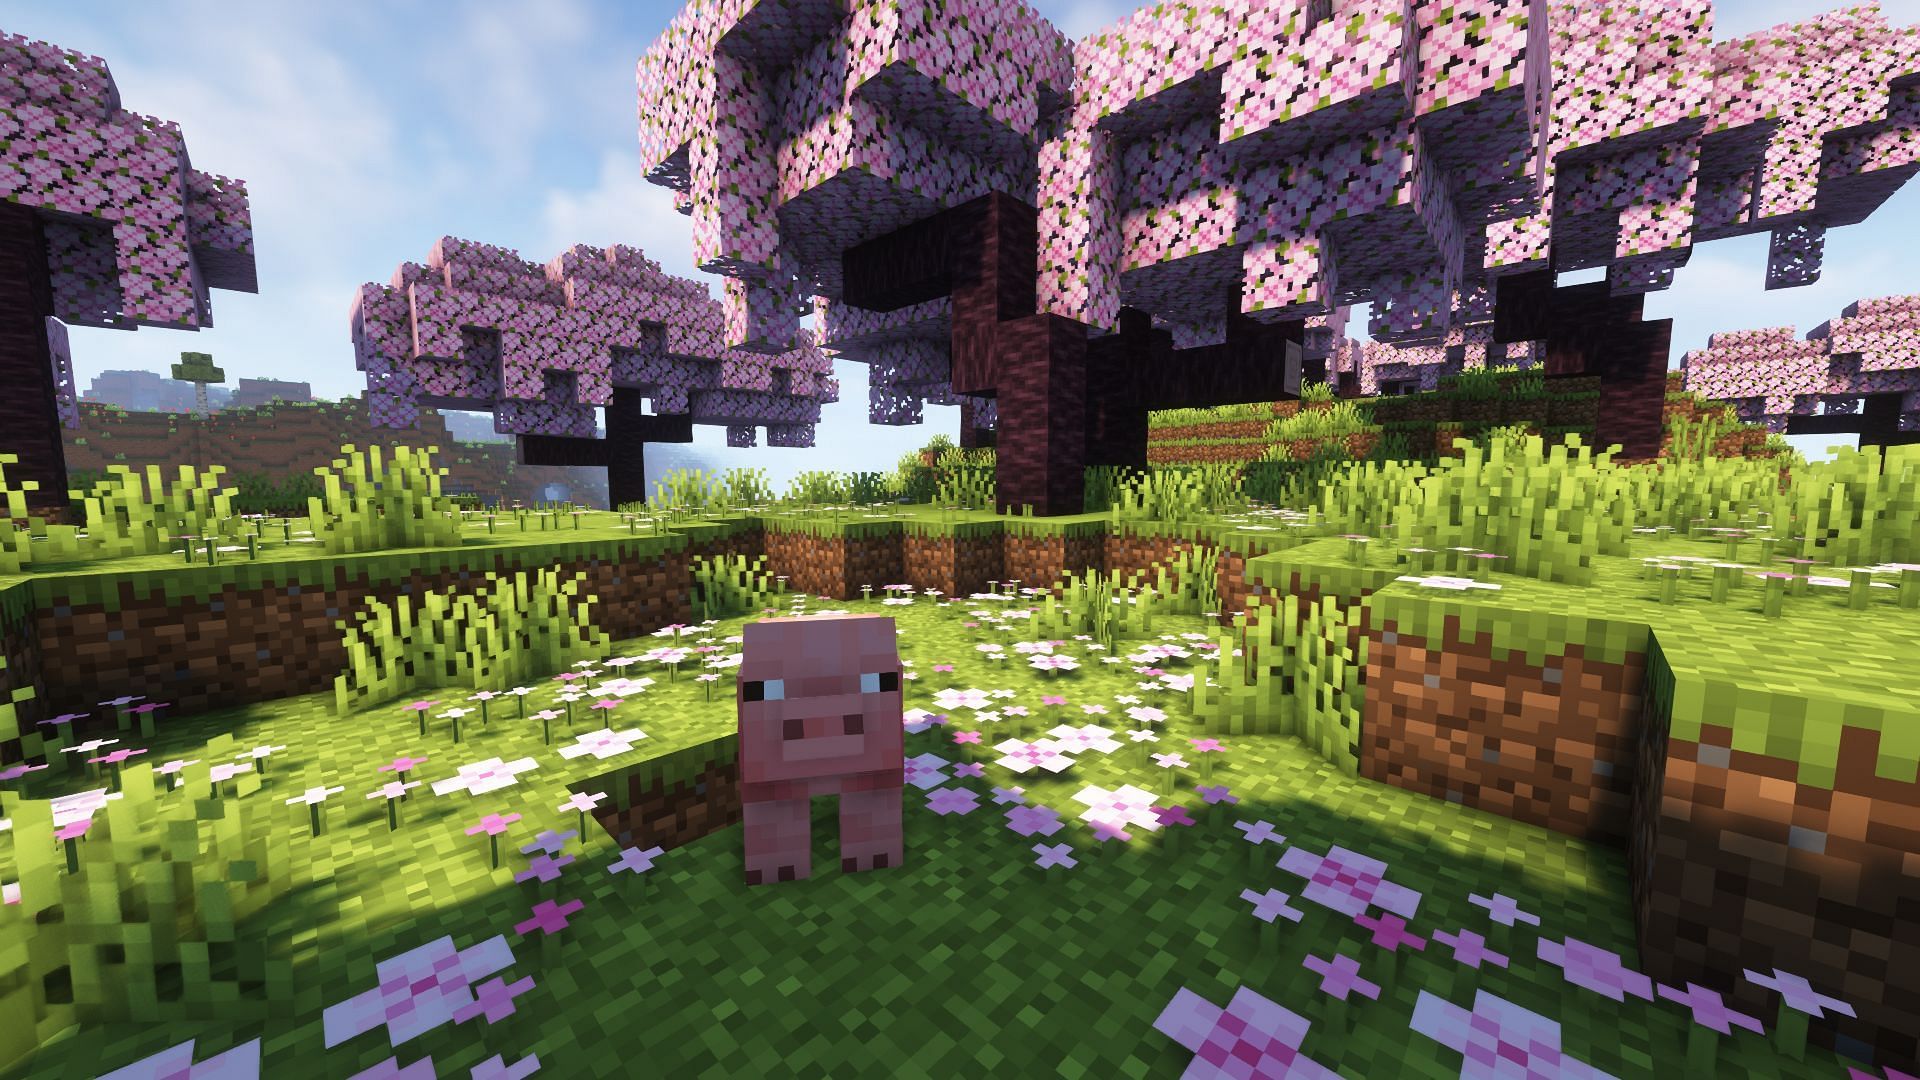 Minecraft shaders can be heavy on low-end PCs and devices (Image via Mojang)